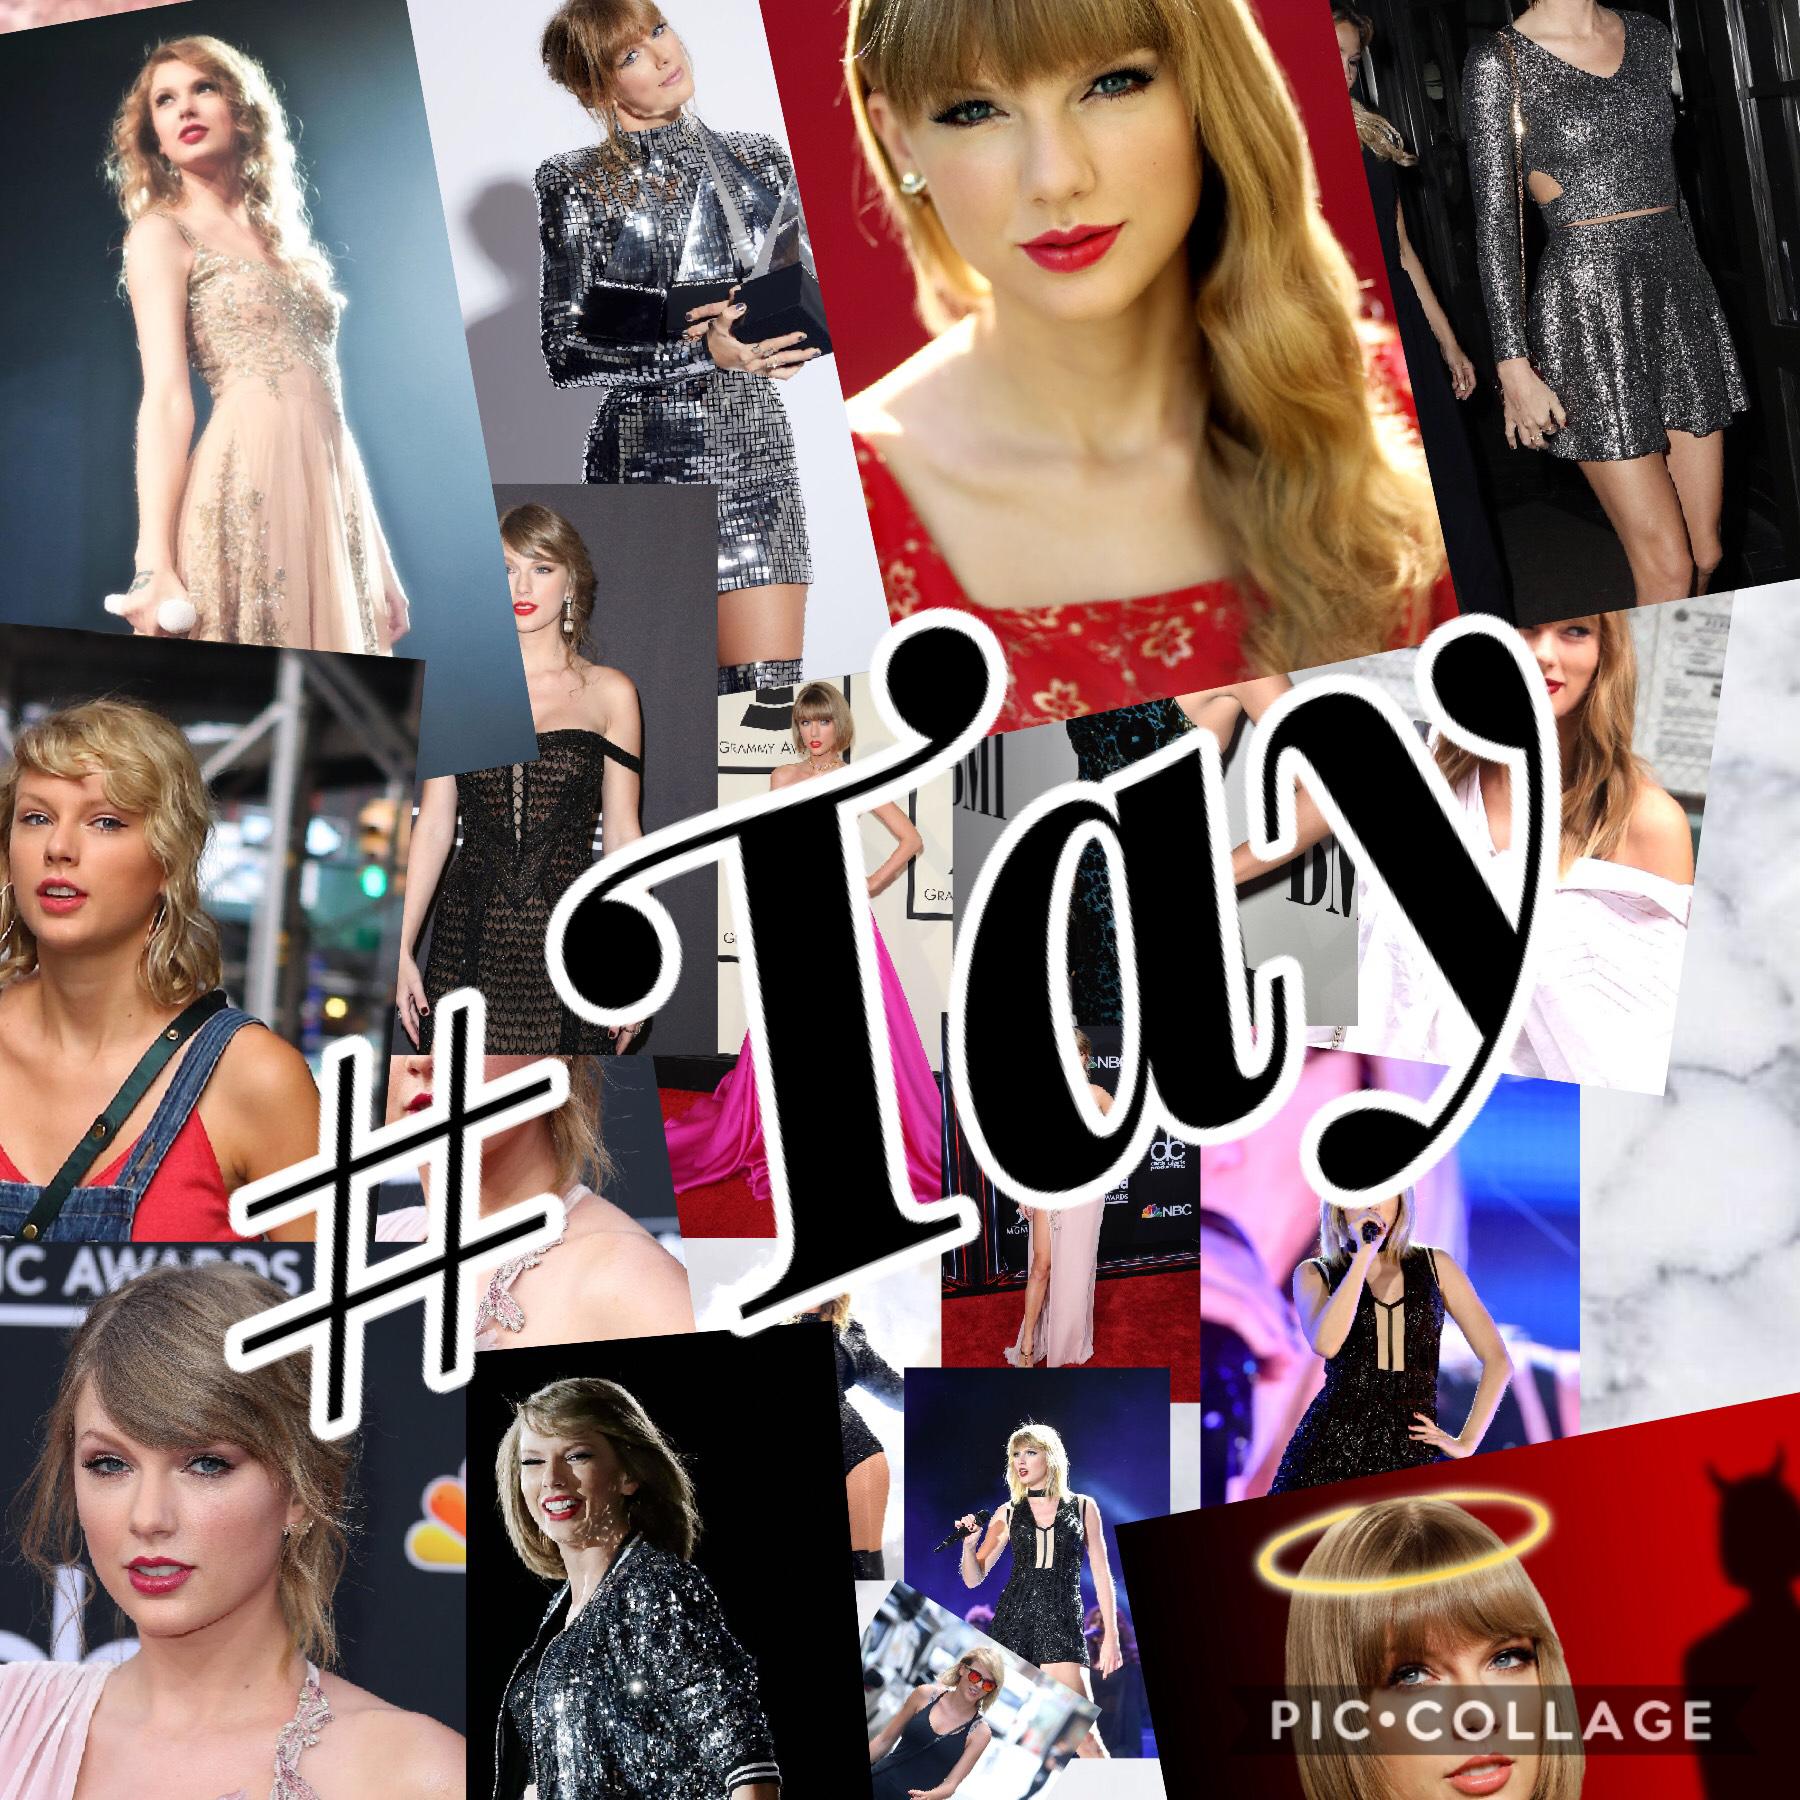 Taylor swift for life